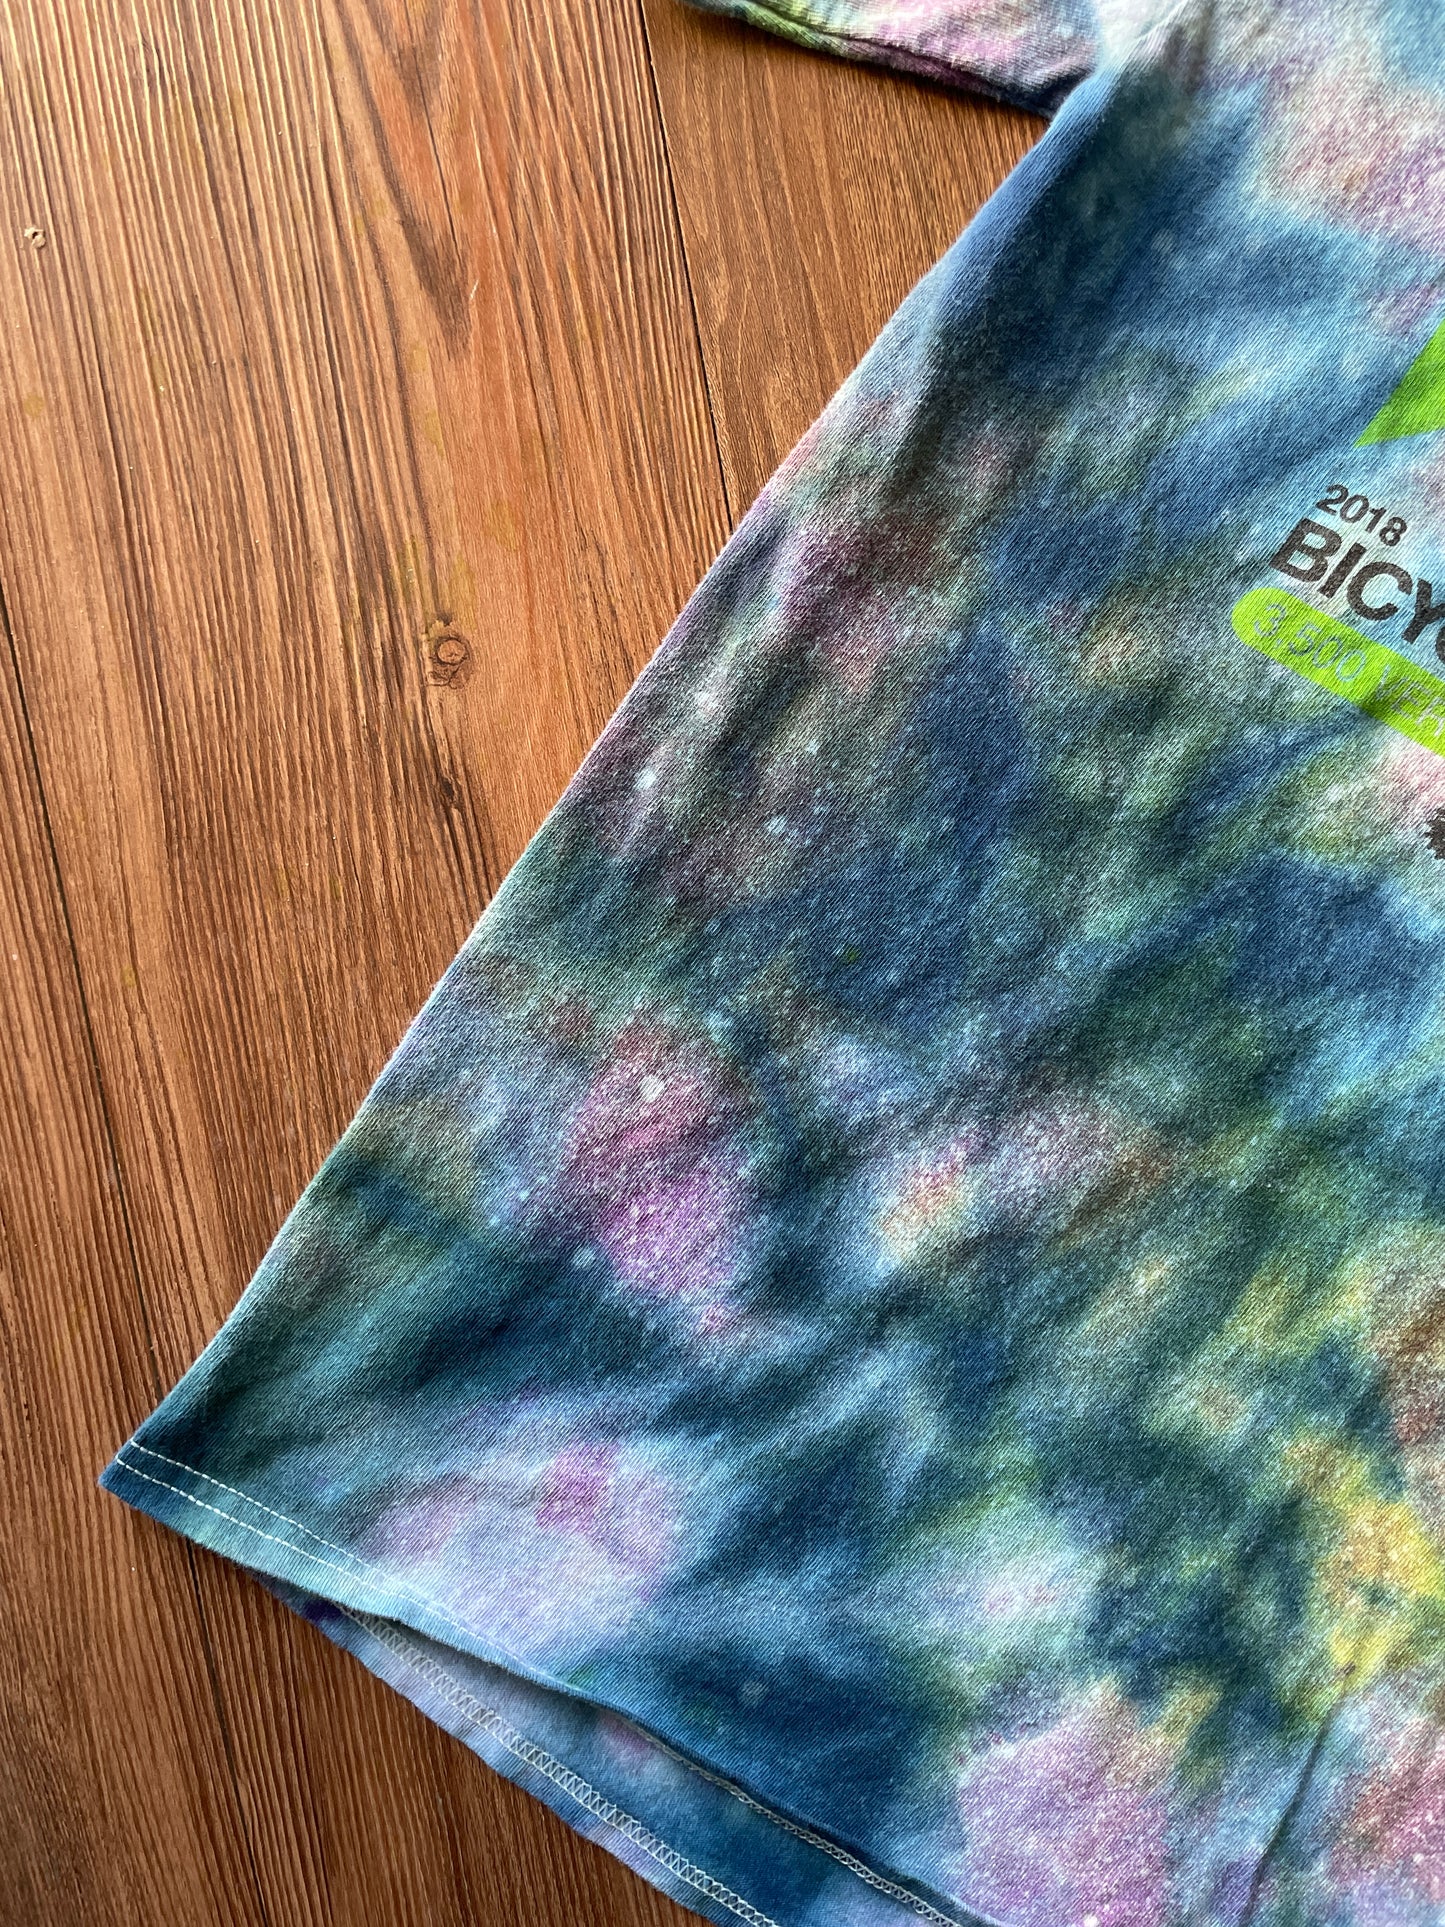 Small Men’s 2018 40th Annual Snowbird Bicycle Hill Climb Galaxy Handmade Tie Dye T-Shirt | One-Of-a-Kind Pastel Blue and Green Short Sleeve